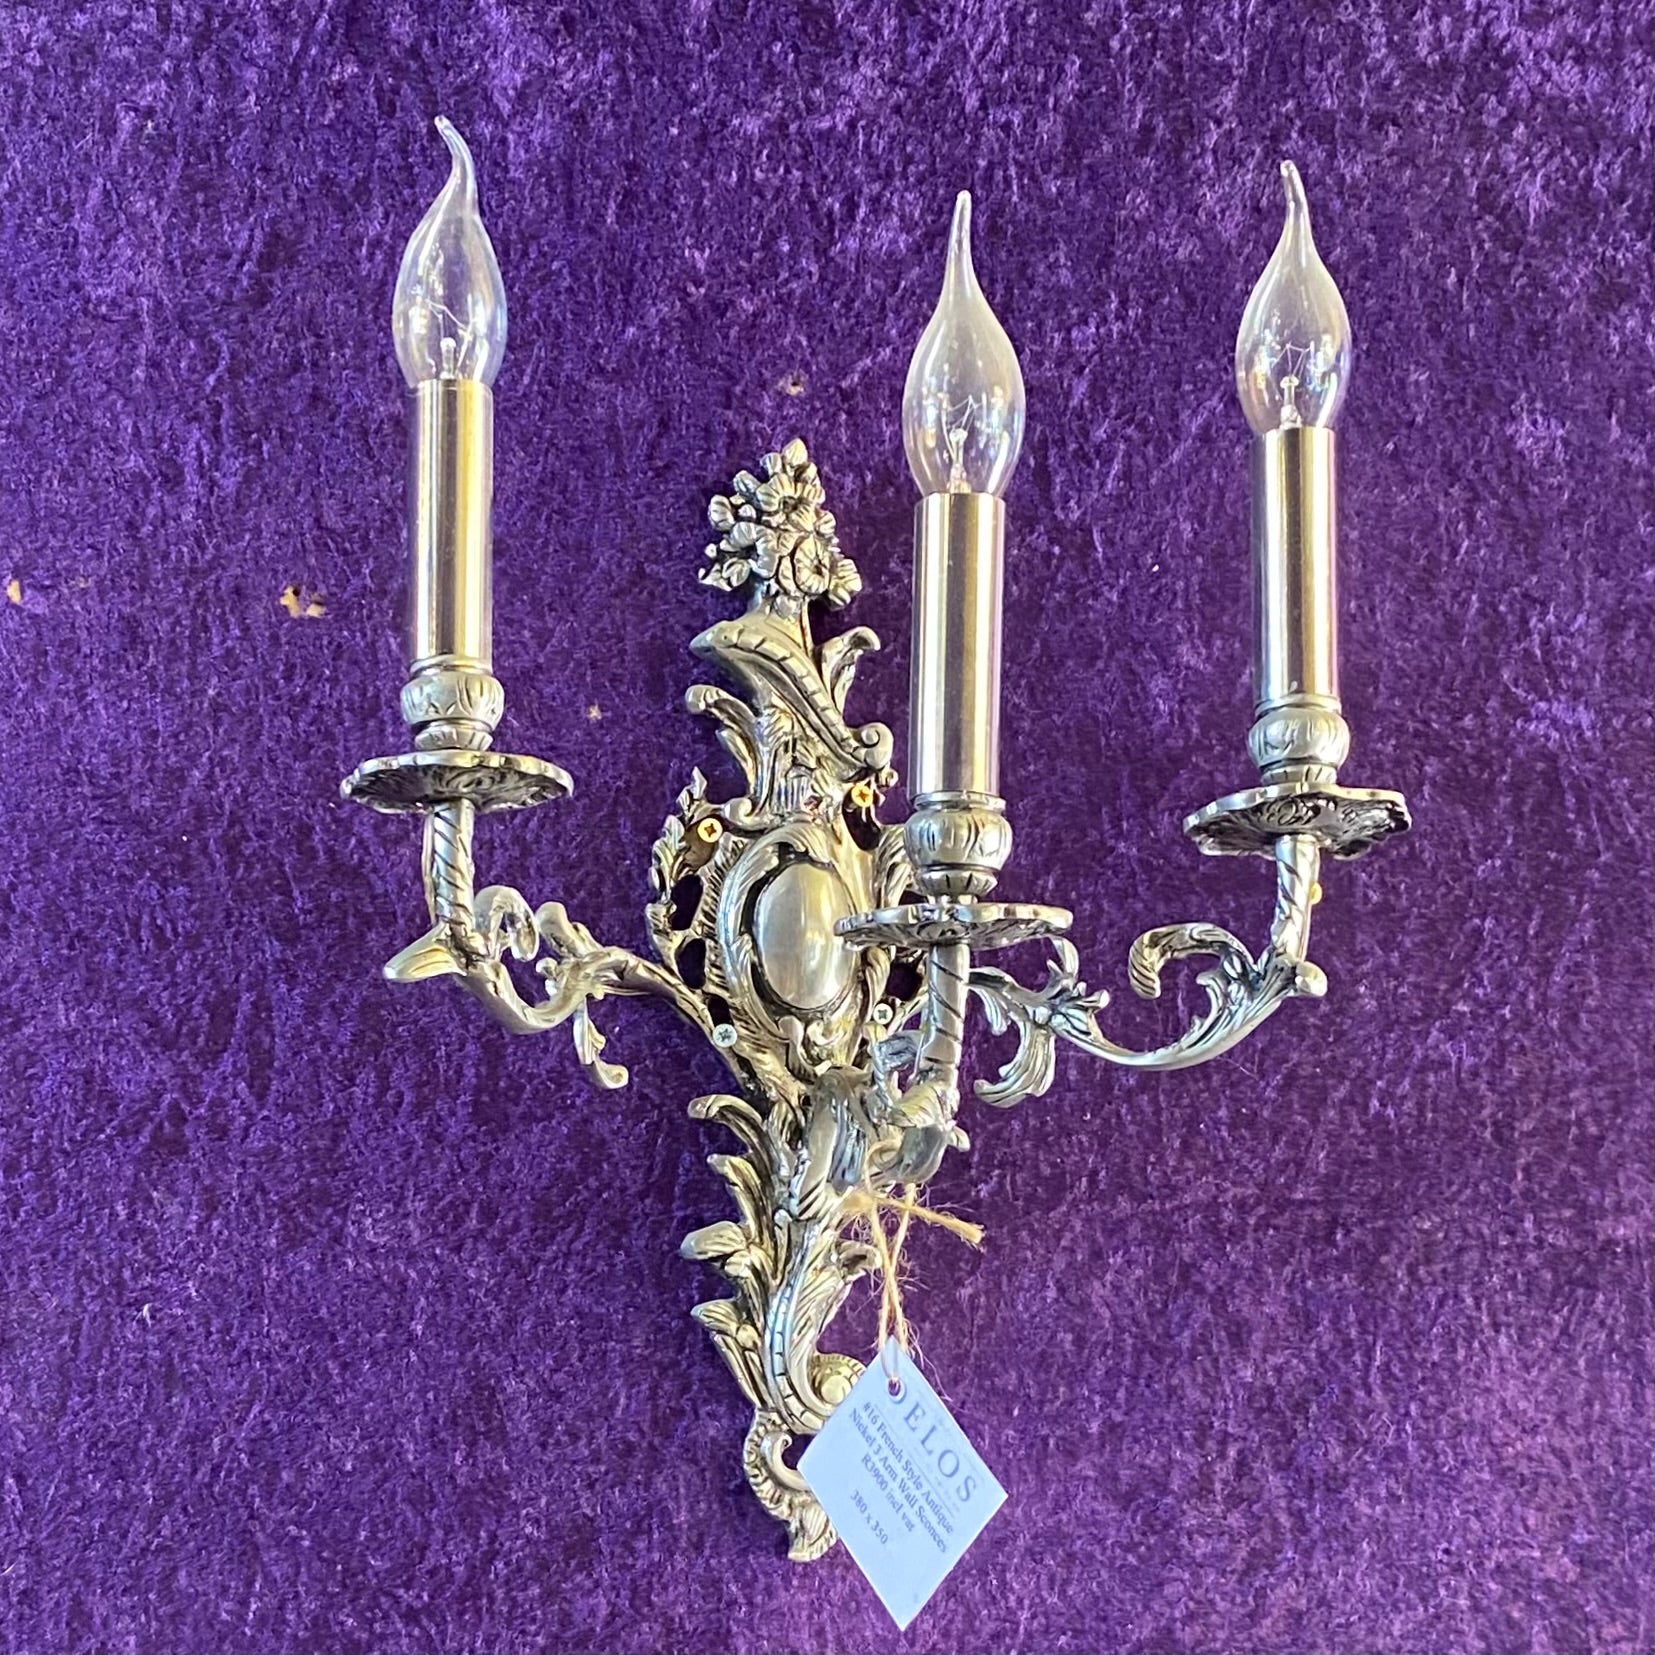 French Style Antique Nickel Plated Three Armed Wall Sconce